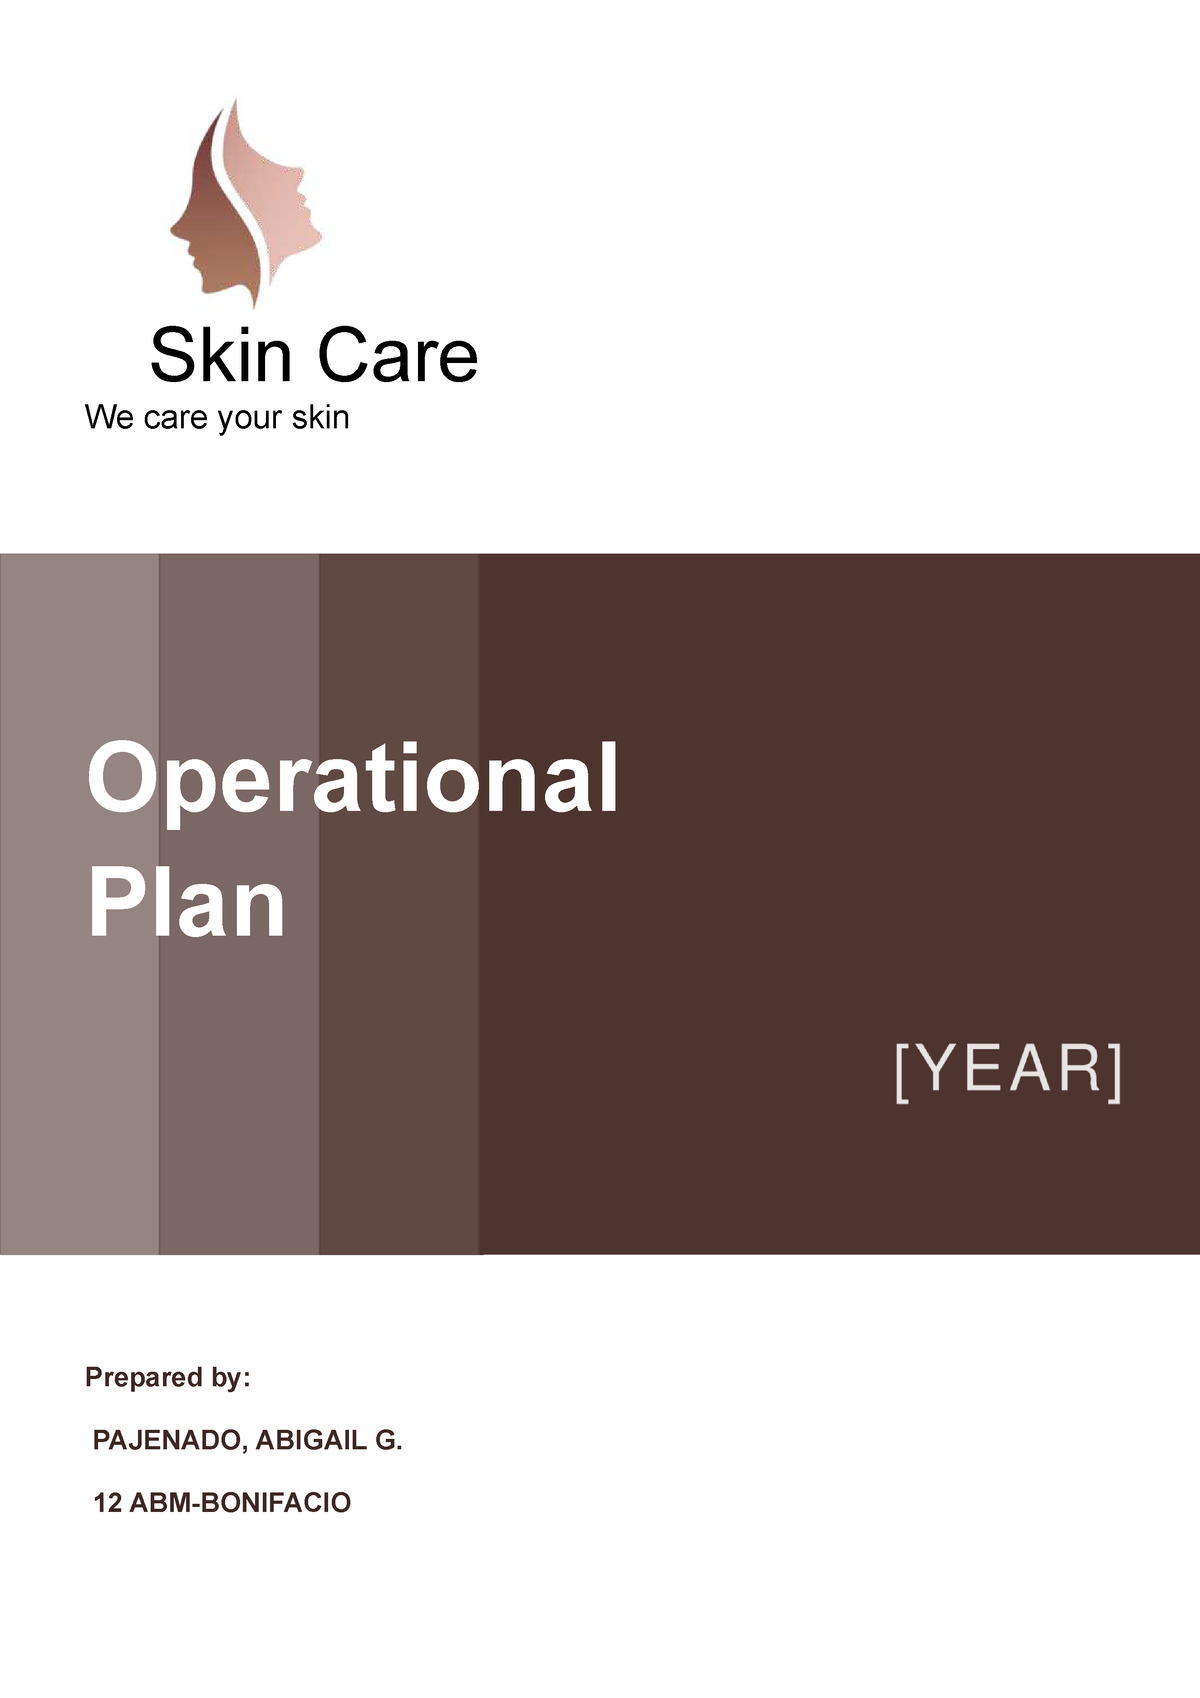 Skin care business plan Skin Care We care your skin Operational Plan